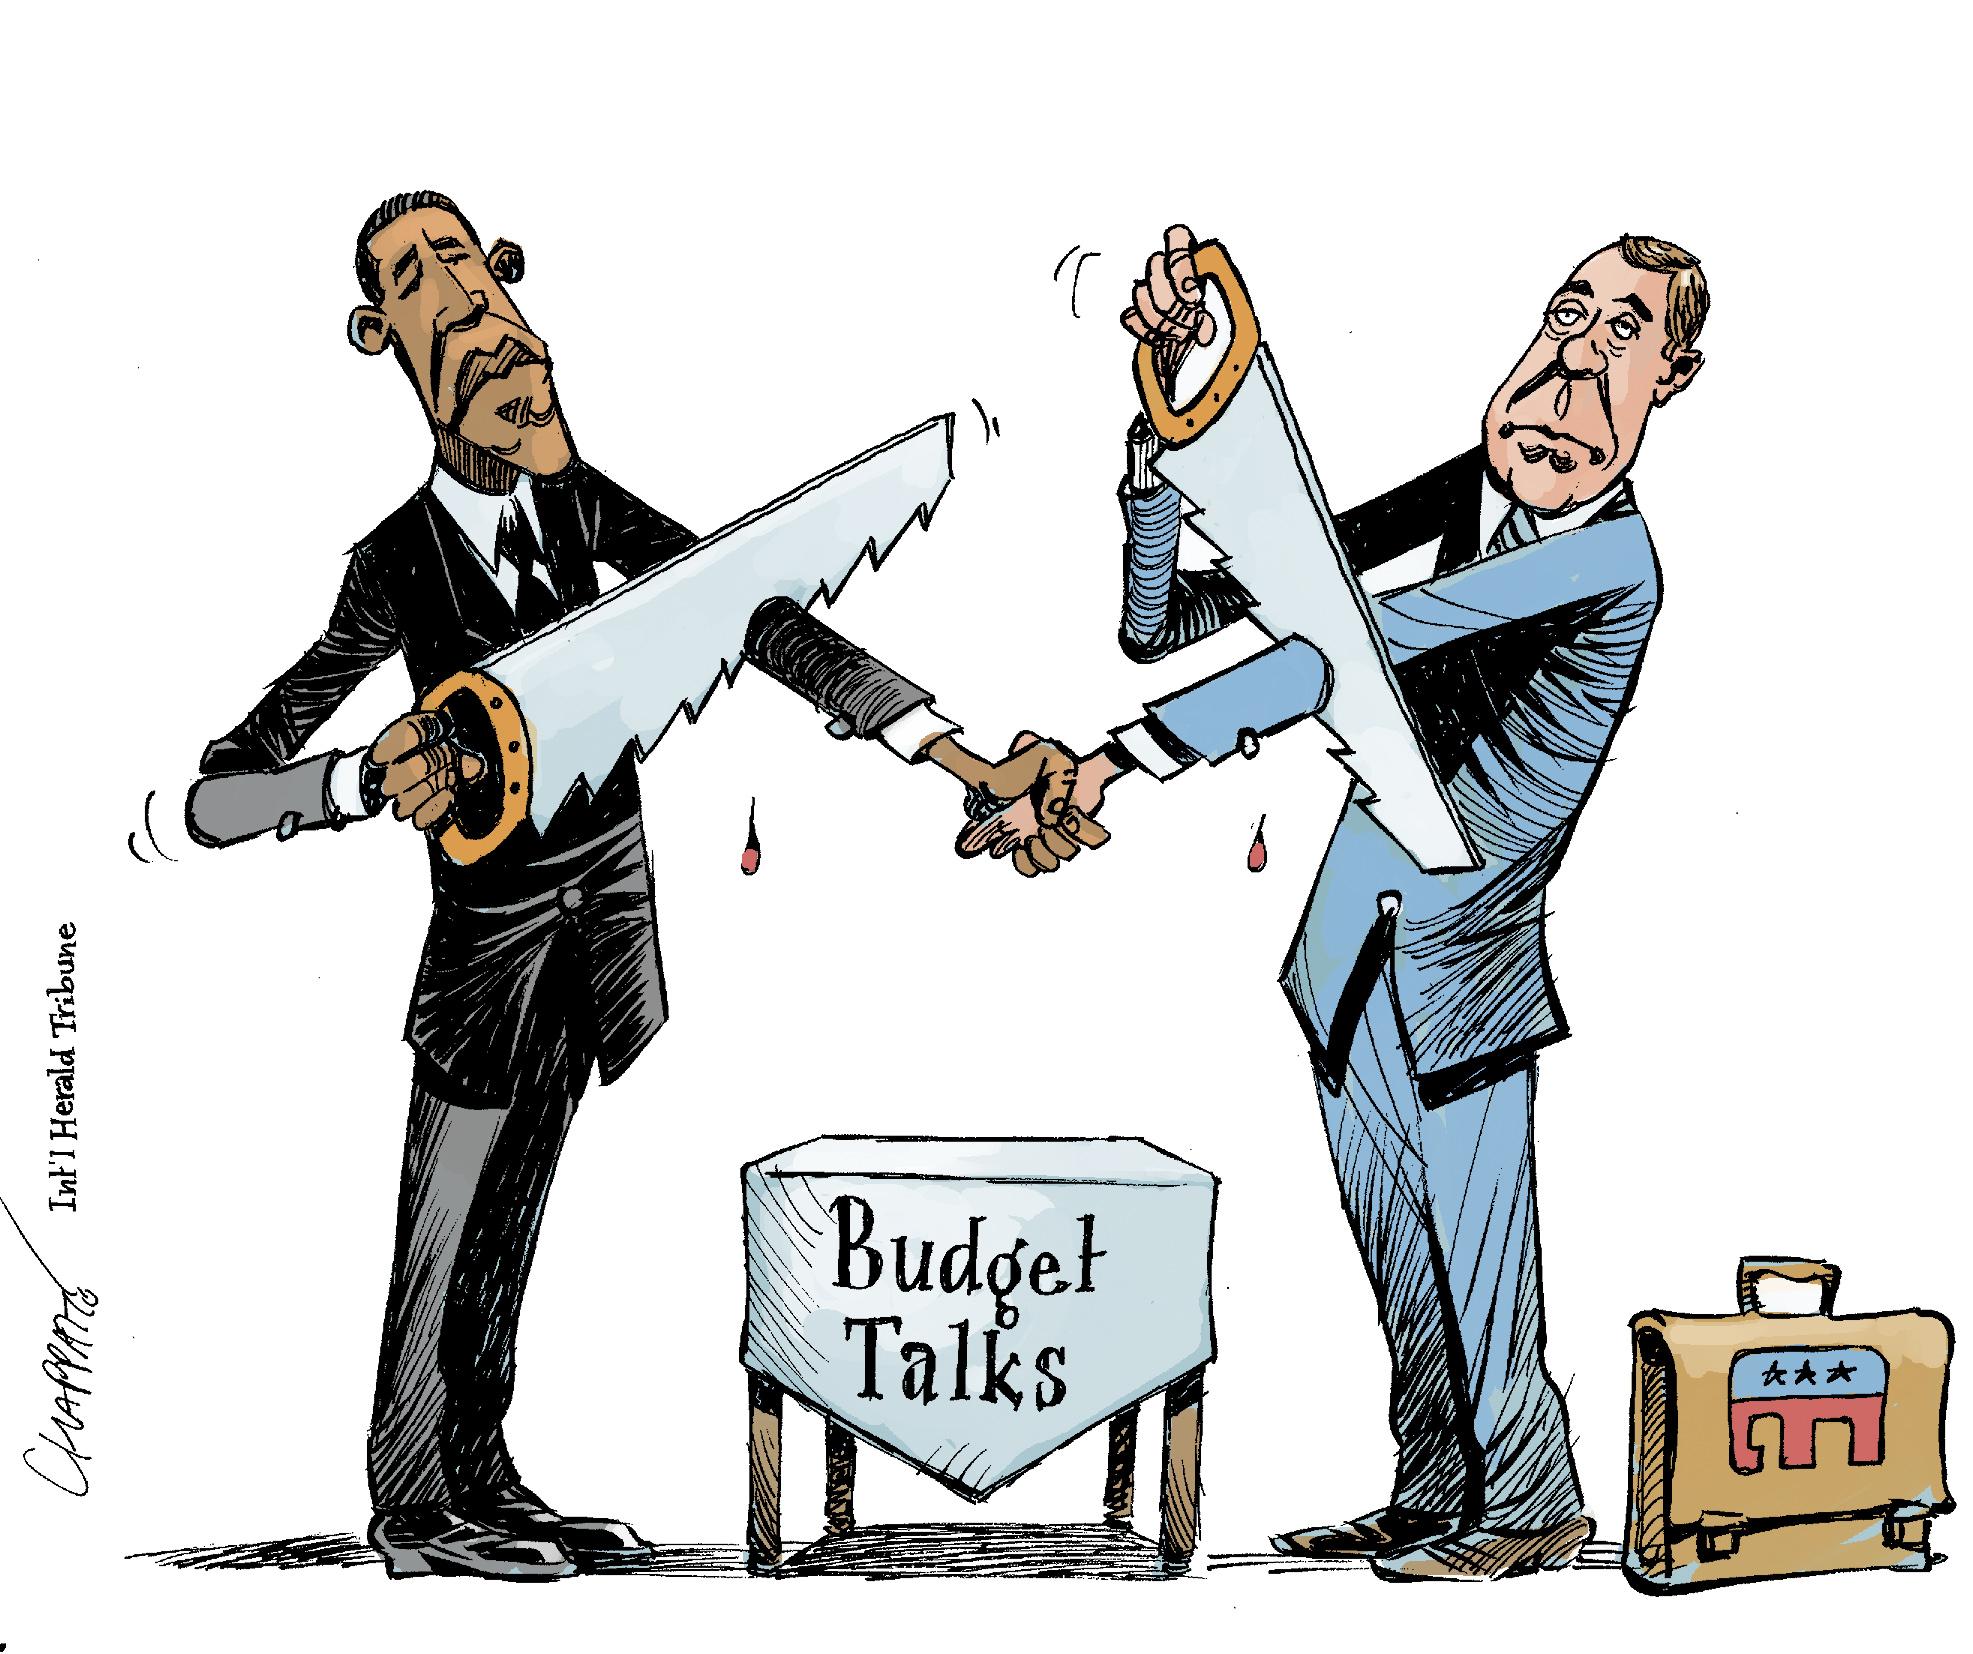 U.S. Budget,the impossible deal